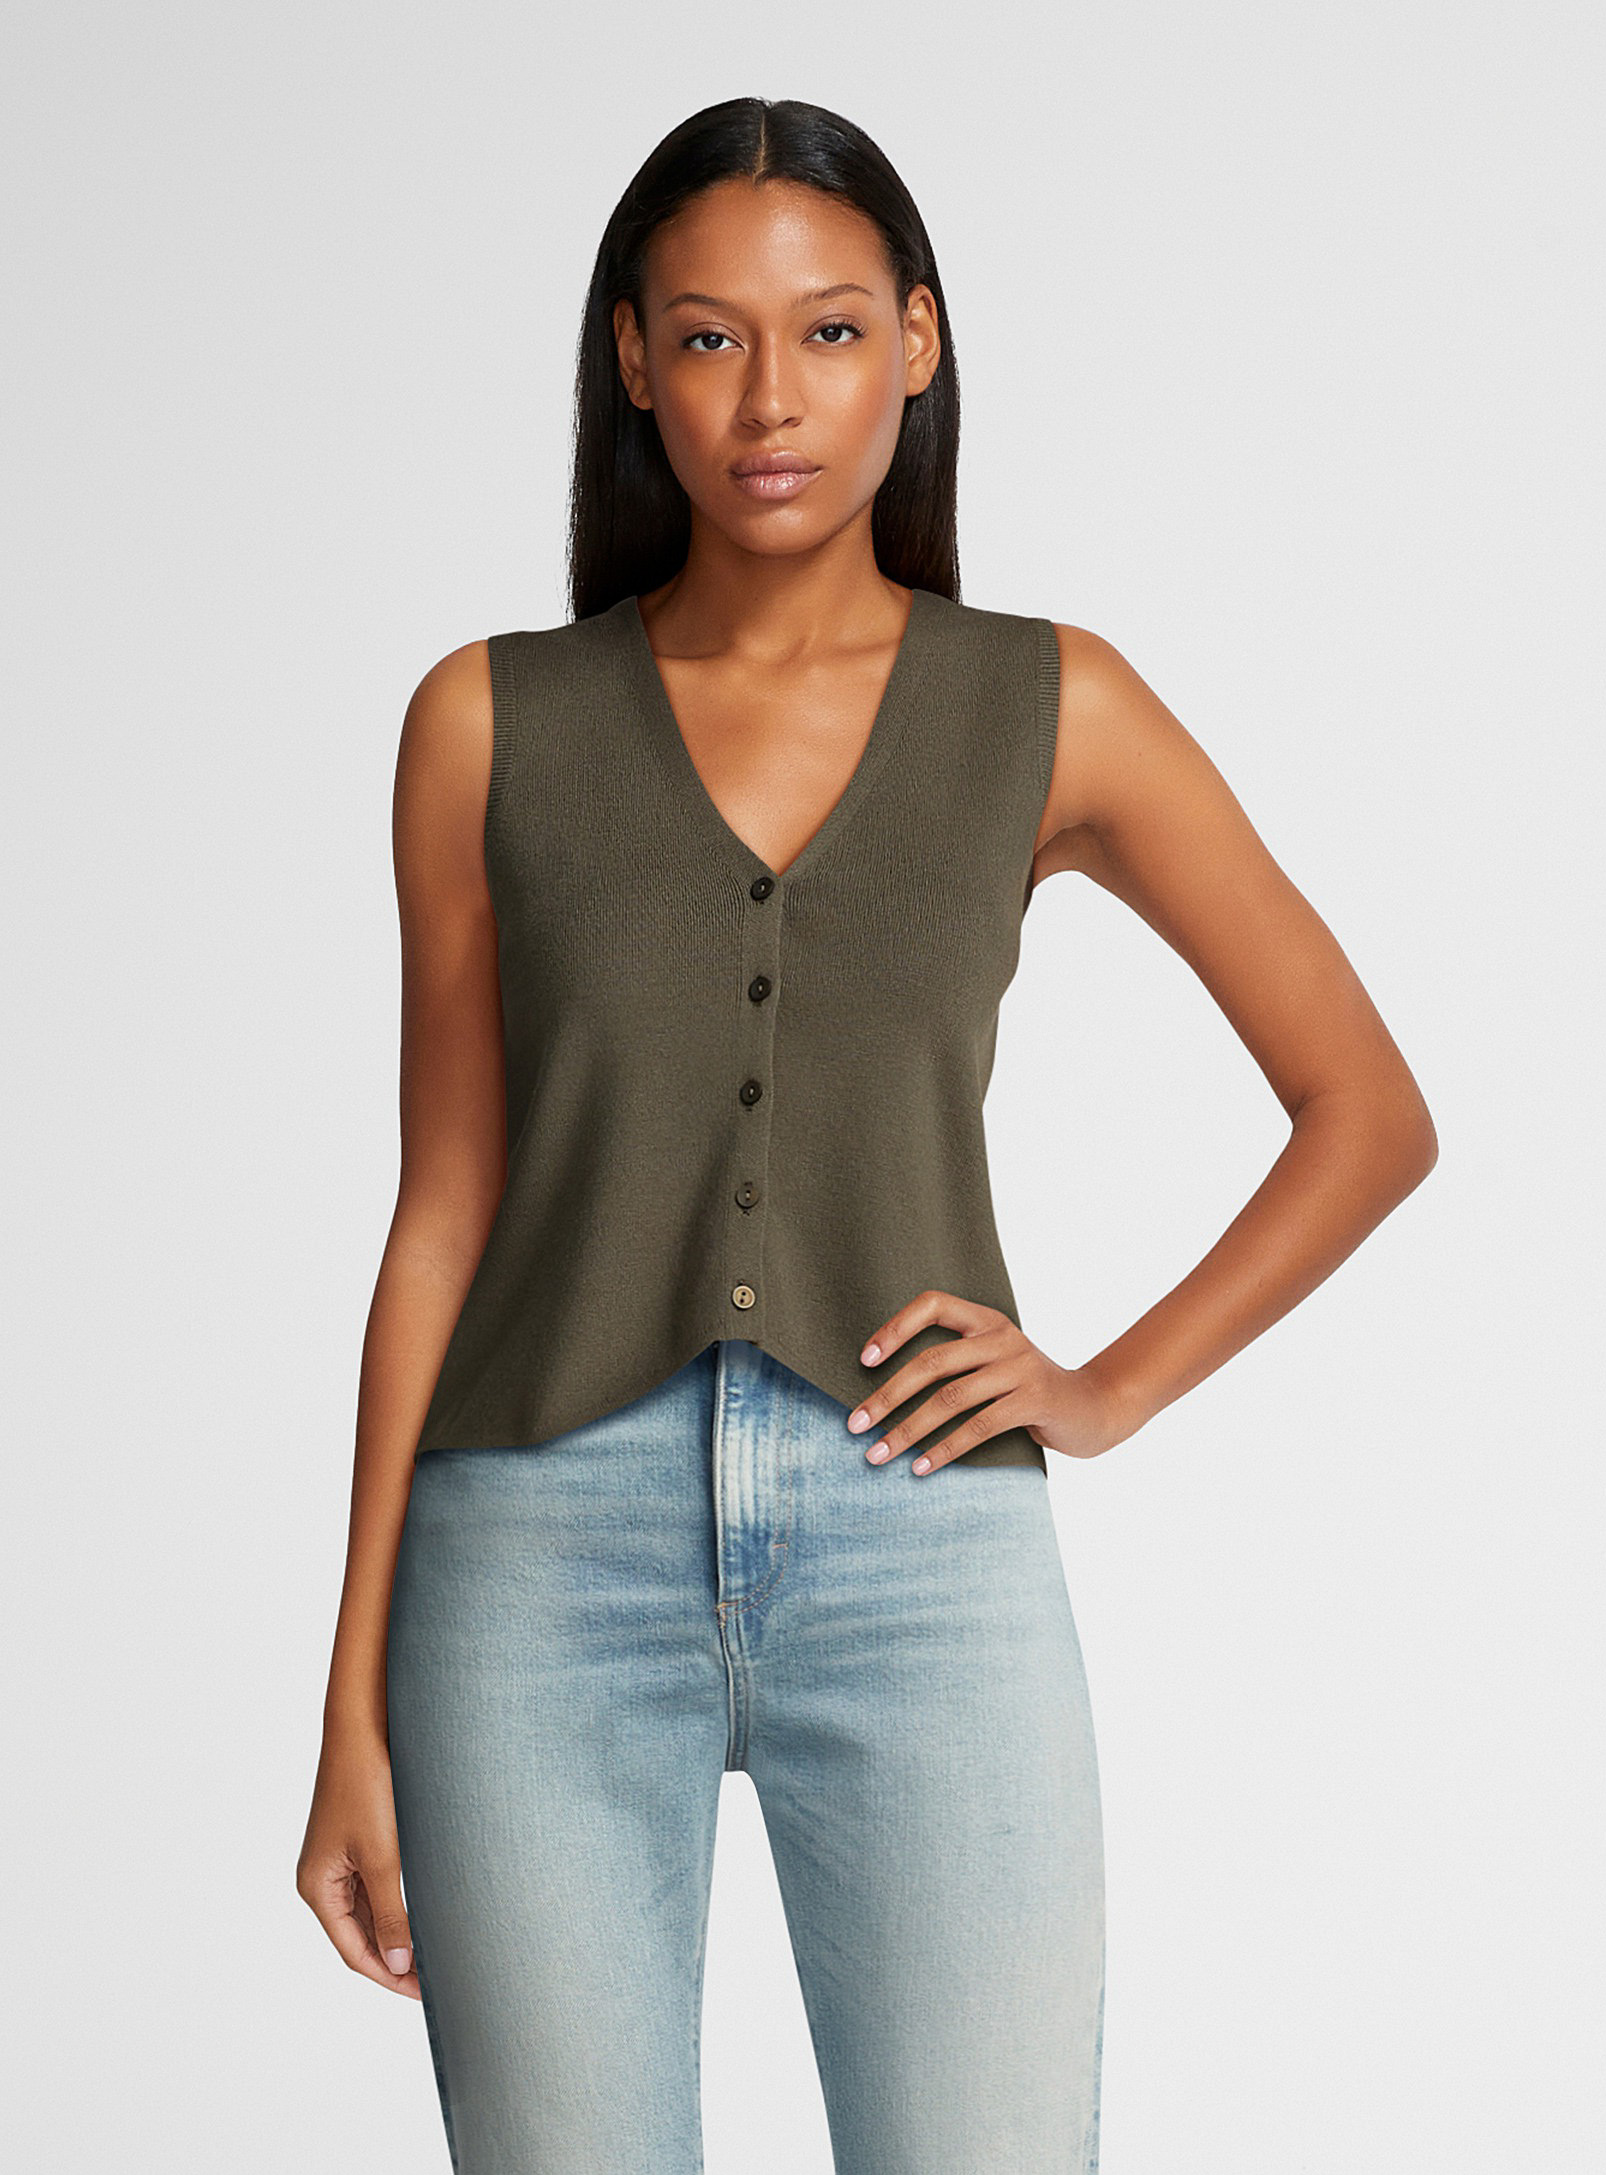 Icone Thick Knit Buttoned Sweater Vest In Khaki/sage/olive